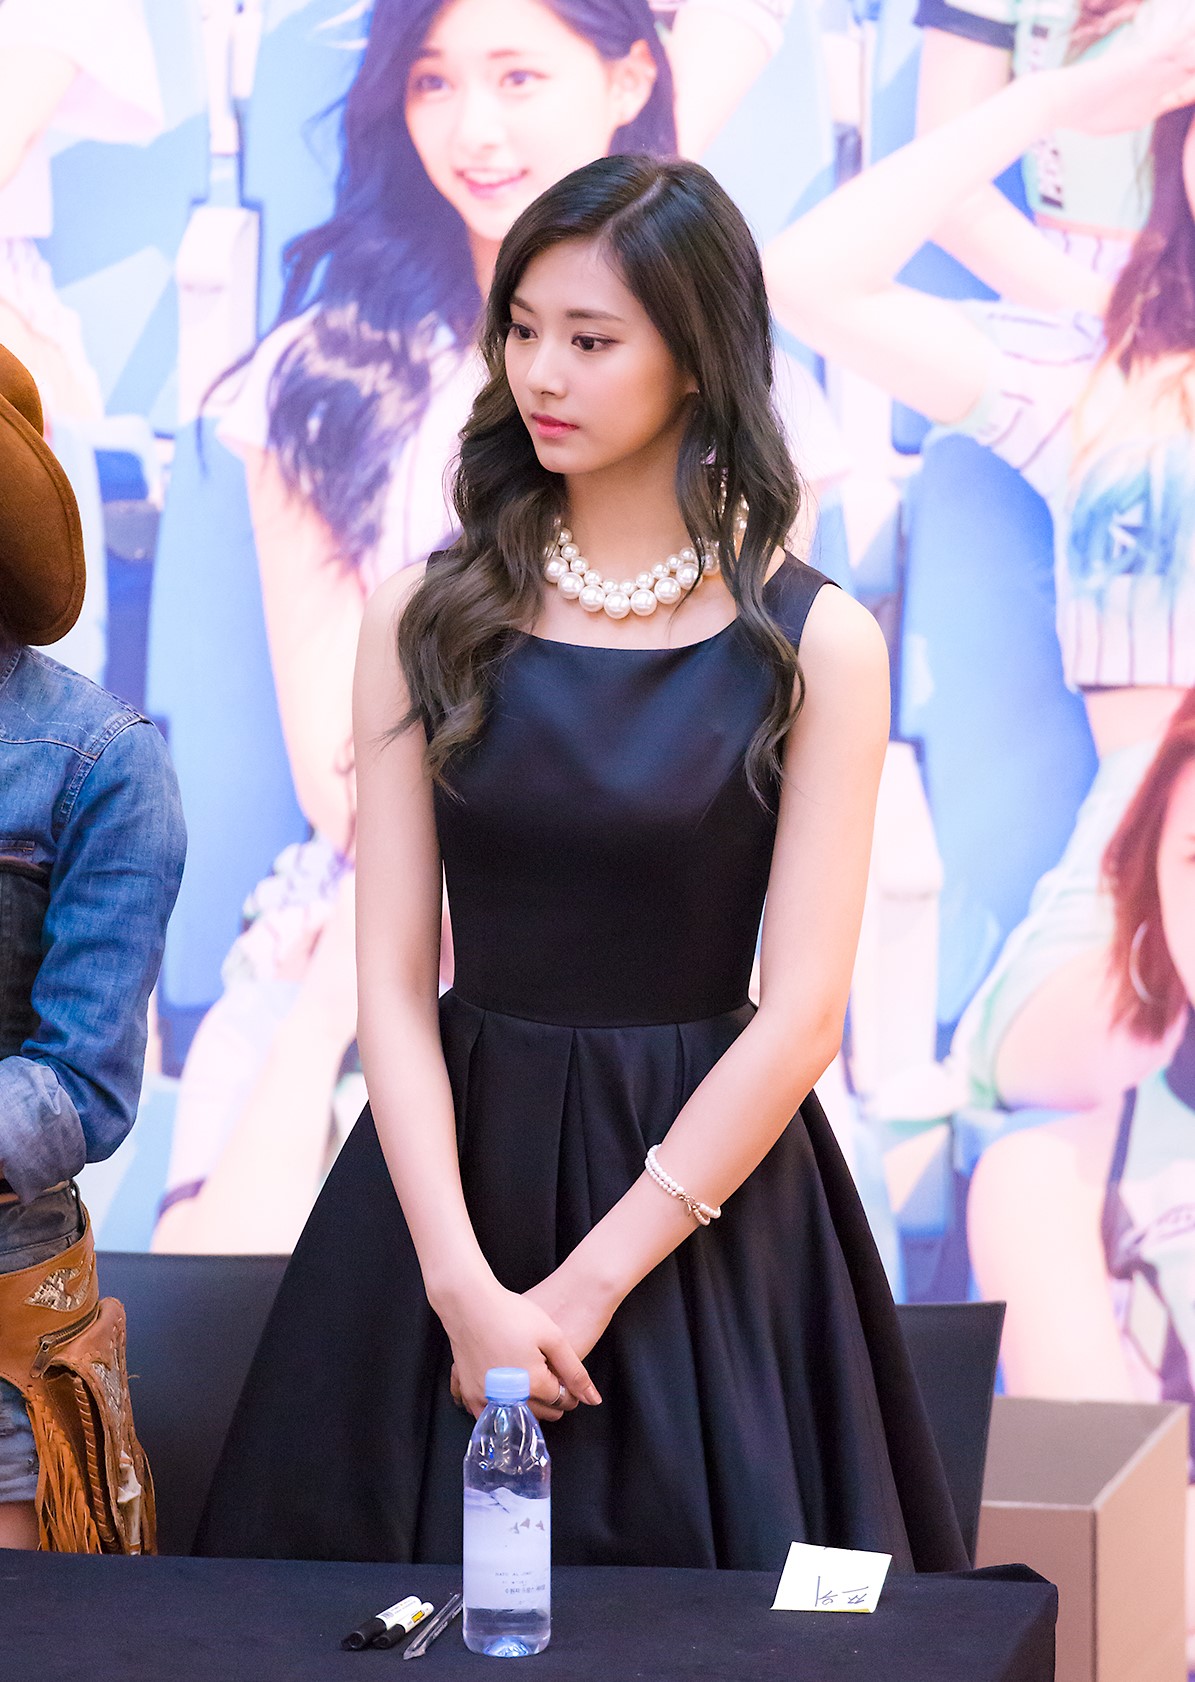 (2016-05-14) Twice Tzuyu in Black Dress  Page Two 4th Fansign @ Yeouido IFC Mall (1).jpg